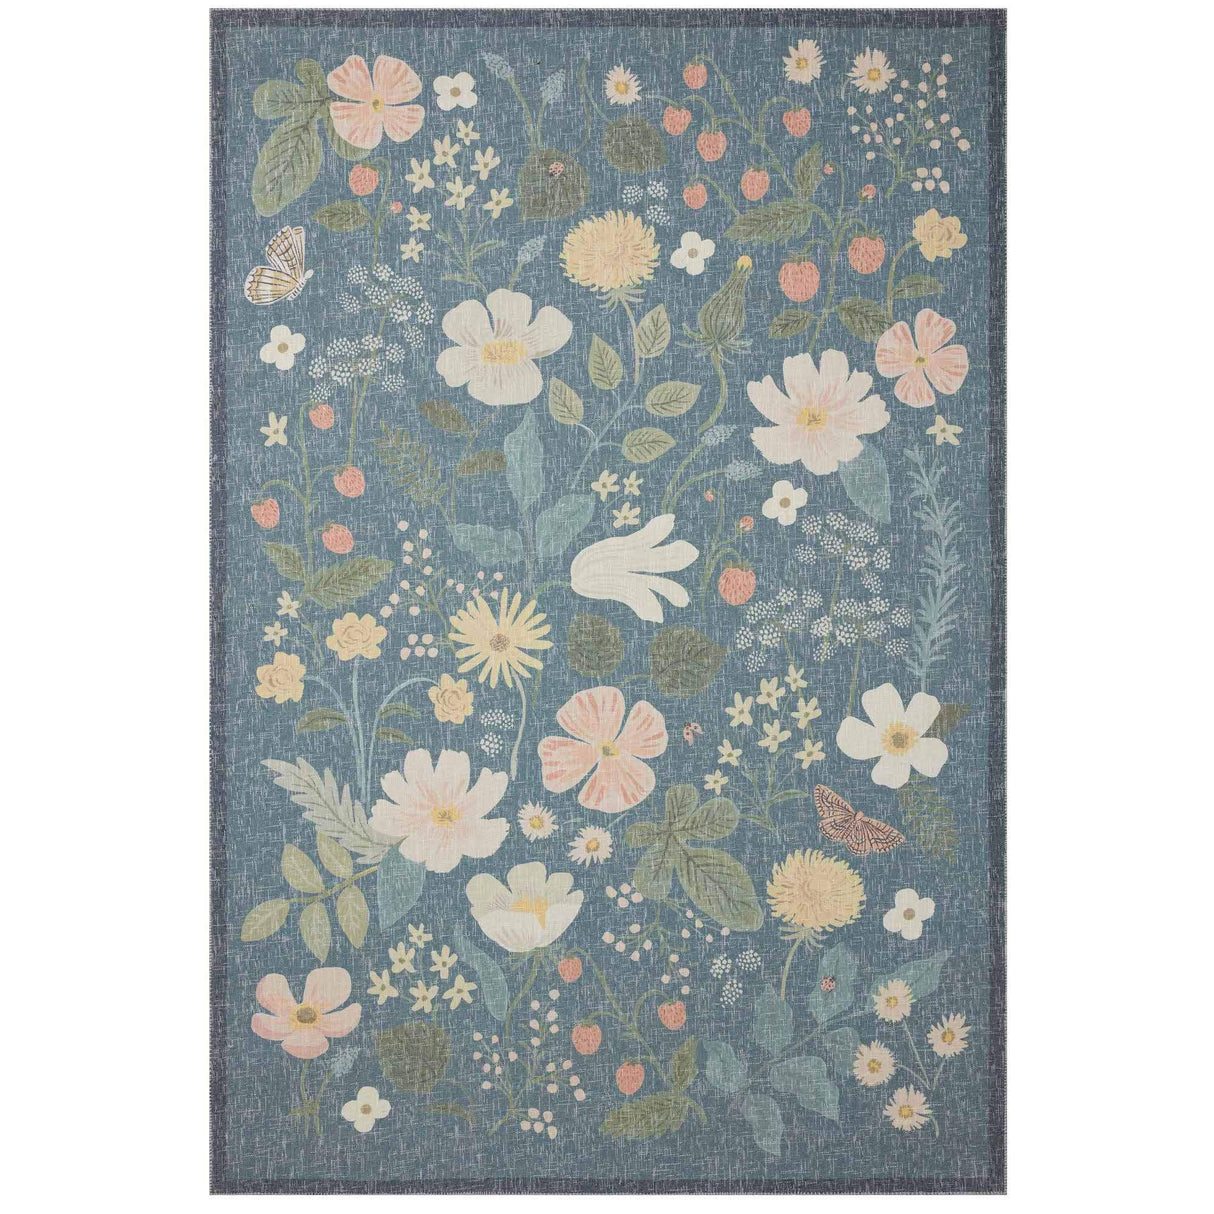 Loloi Rifle Paper Co. Cotswolds Rug - Strawberry Fields Ivory Rugs loloi-COTWCOT-01TE002050 885369604683